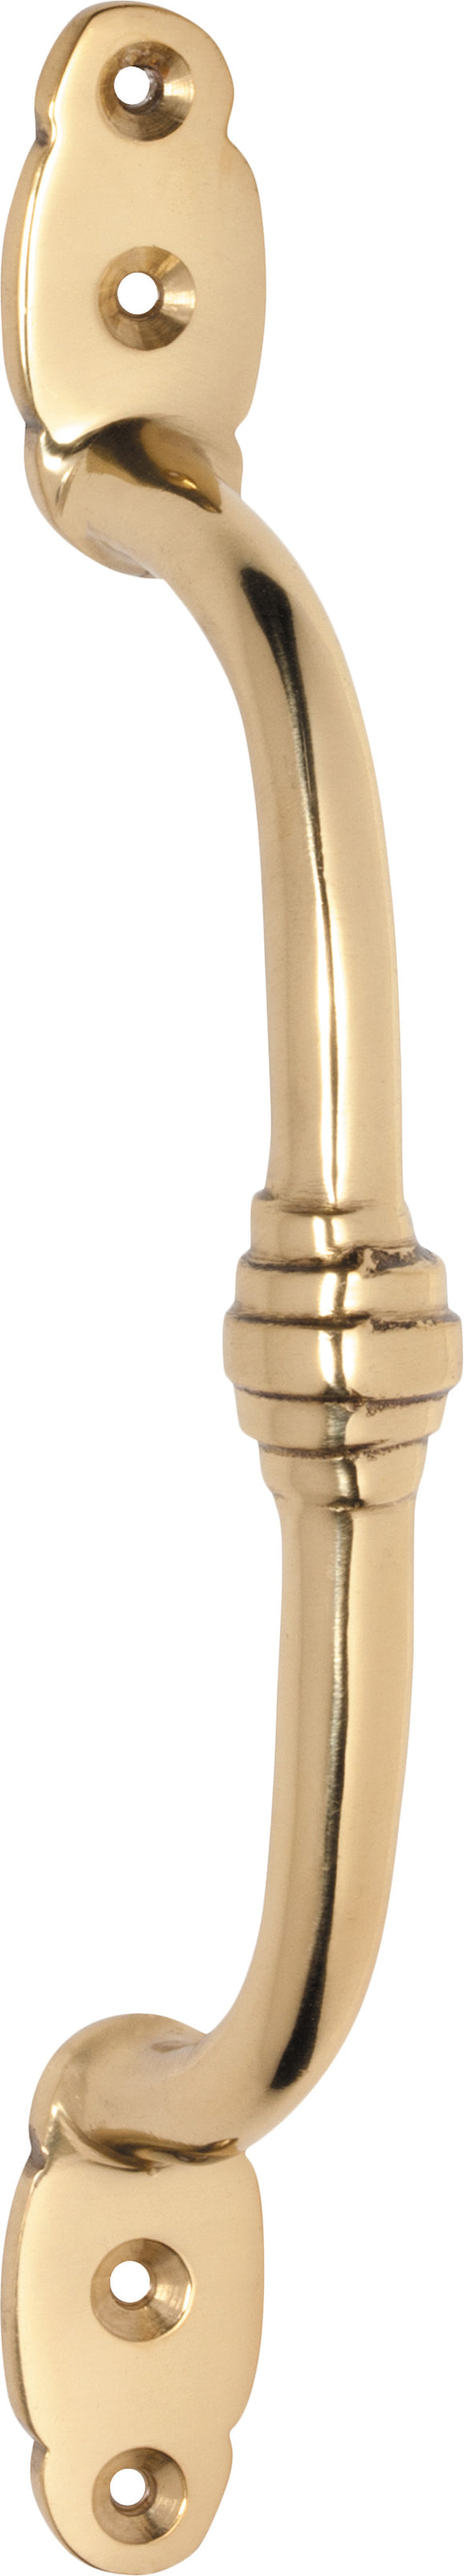 Pull Handle Offset Banded Polished Brass H180xP41mm